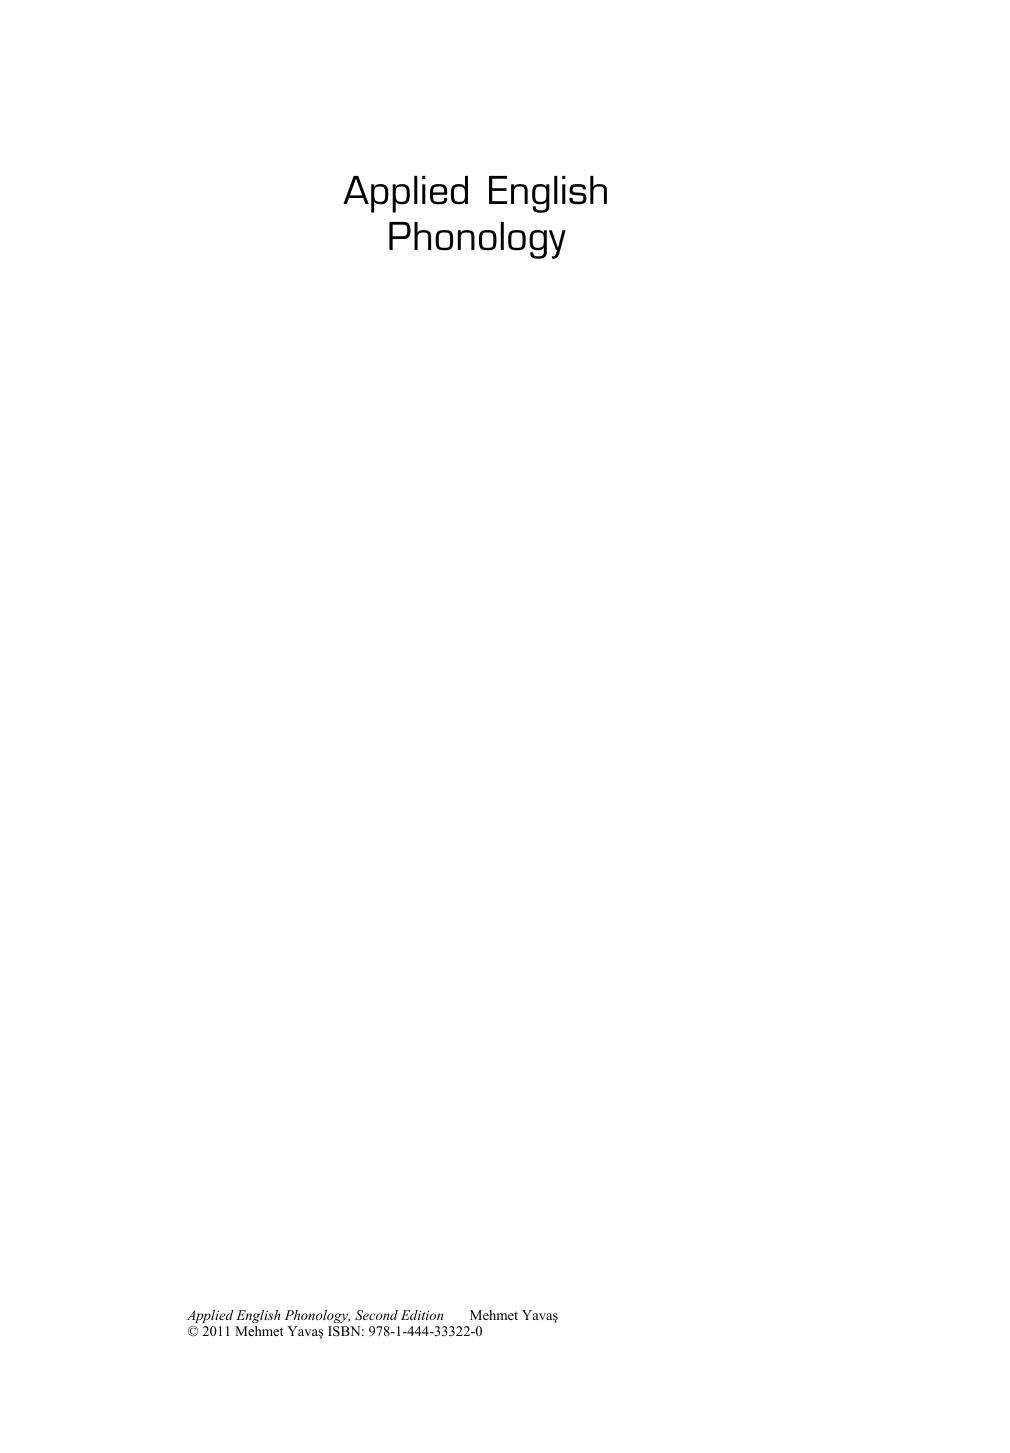 Applied English Phonology, Second Edition- Wiley-Blackwell 2011